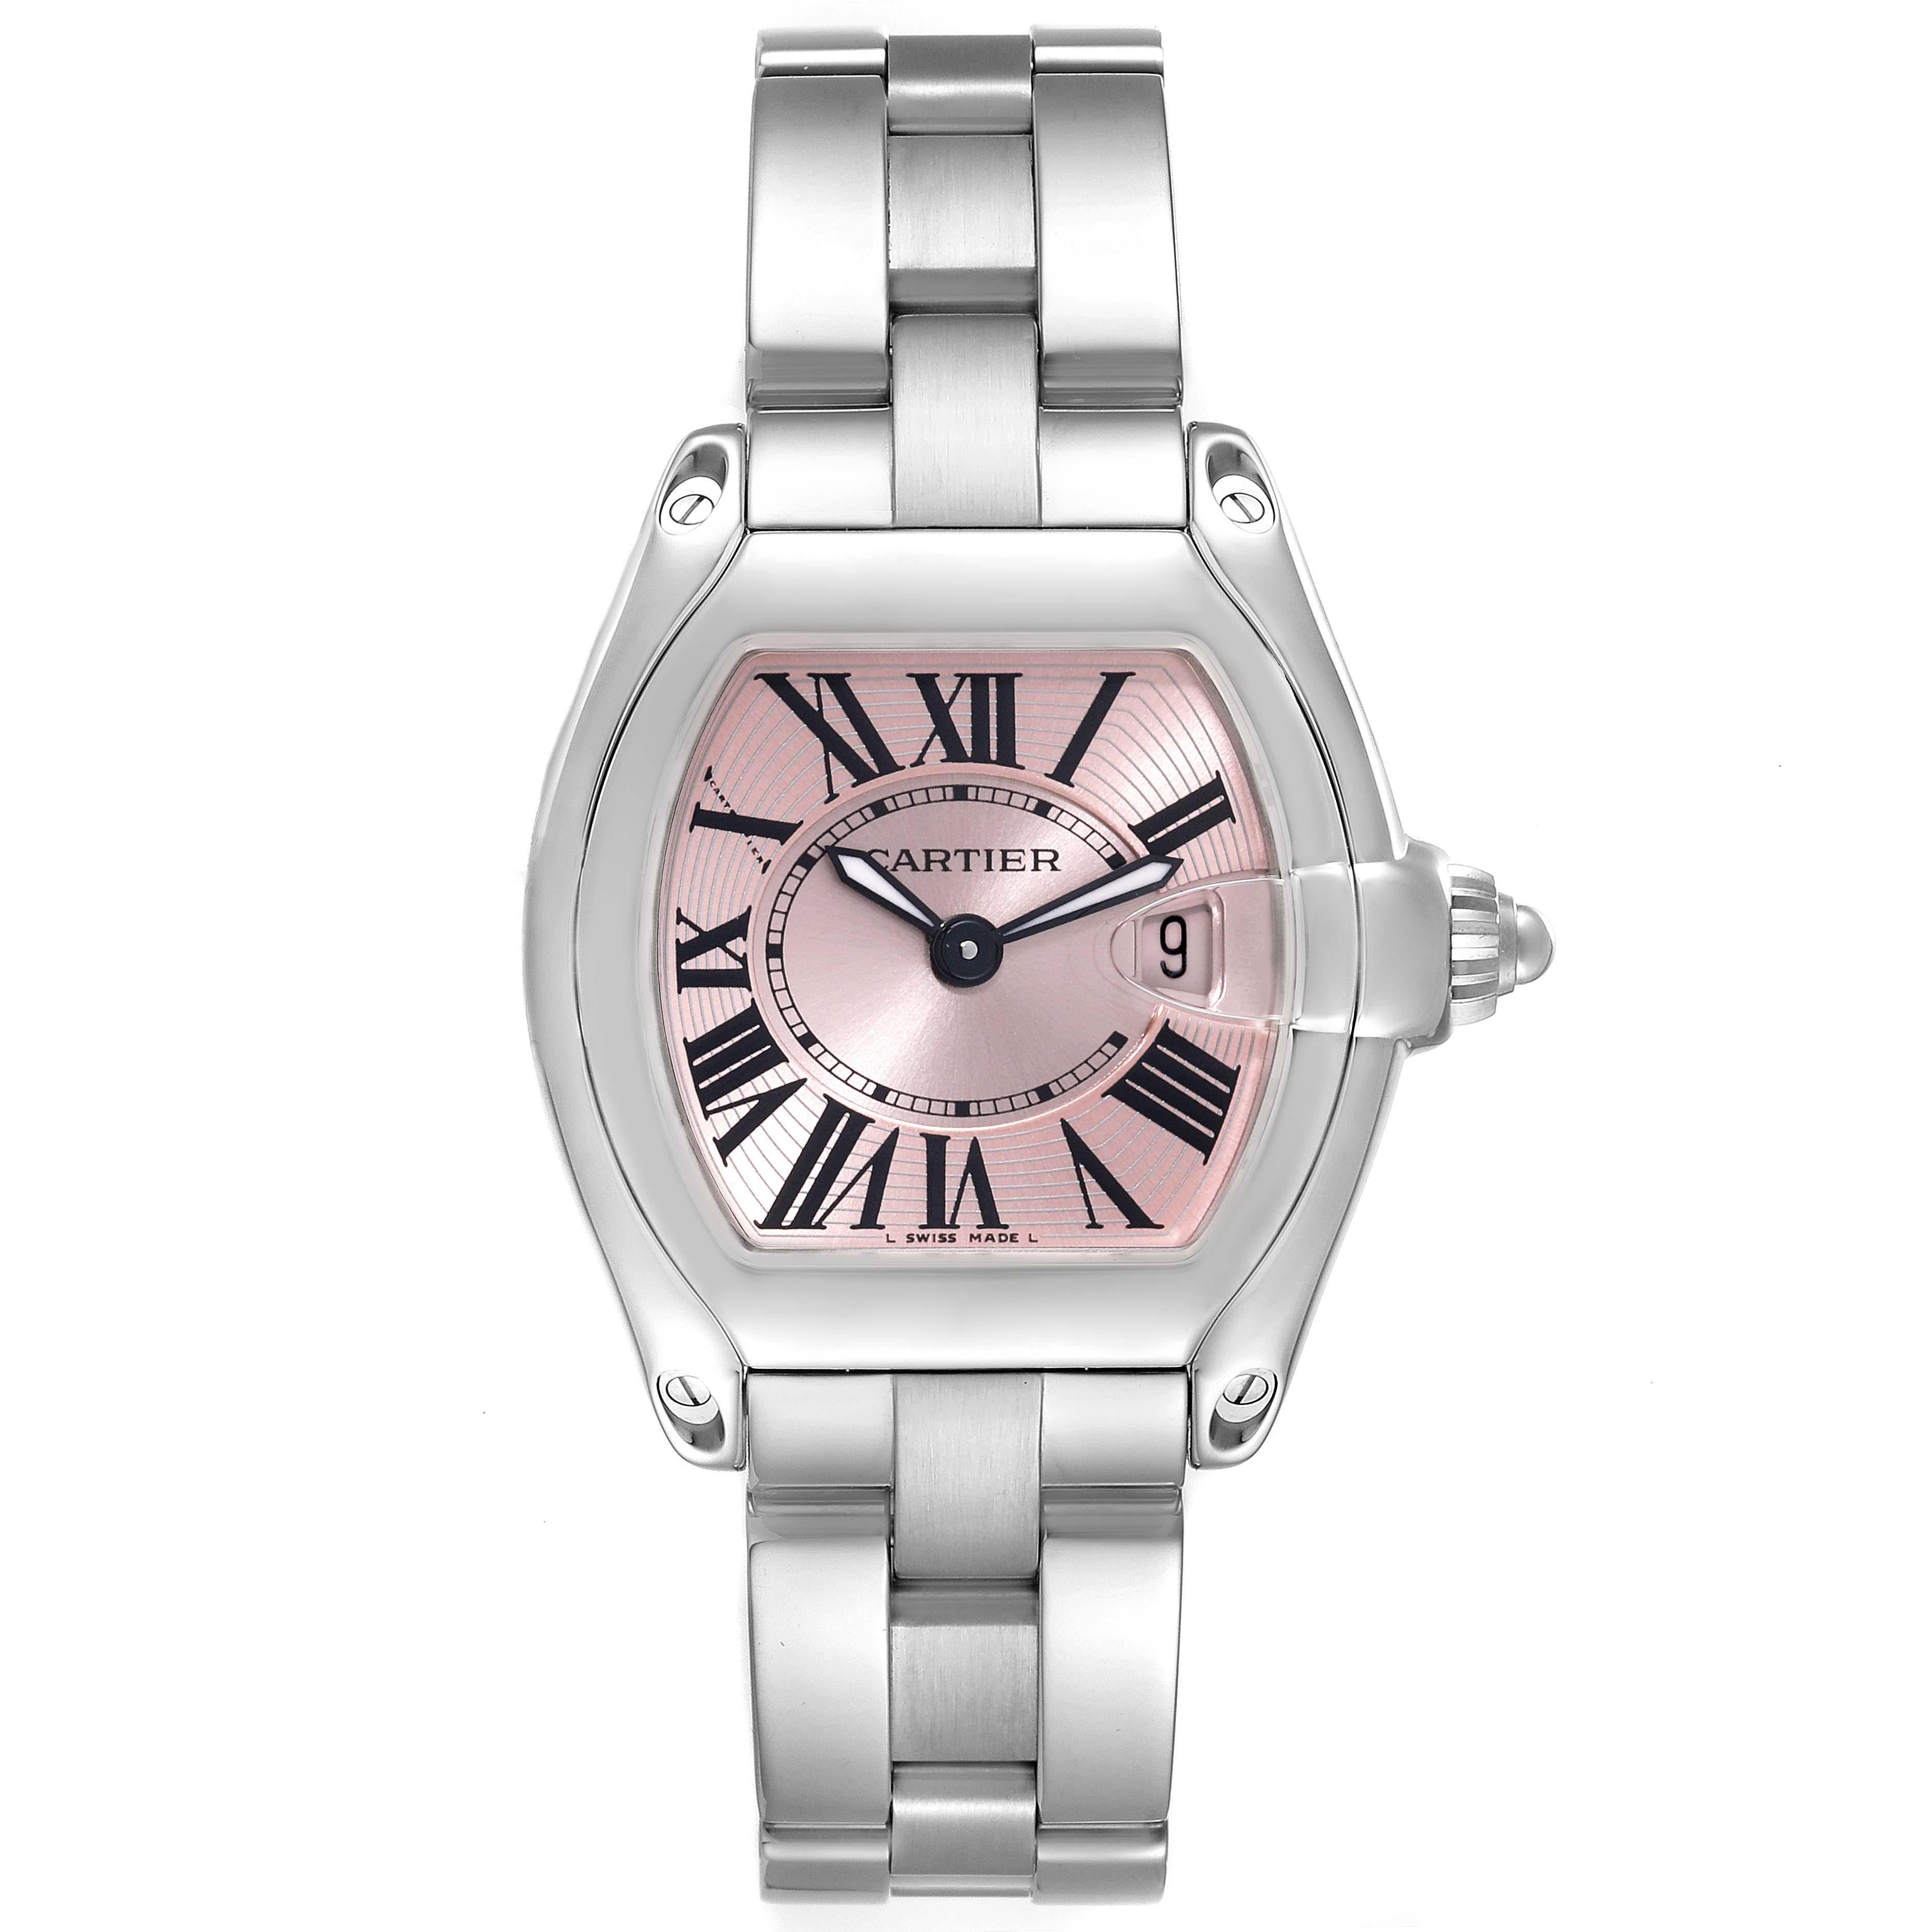 Cartier Roadster Small Pink Dial Steel Ladies Watch W62017V3 Box Papers. Swiss quartz movement calibre 688. Stainless steel tonneau shaped case 36 x 30 mm. . Scratch resistant sapphire crystal with cyclops magnifier. Pink sunray effect dial with